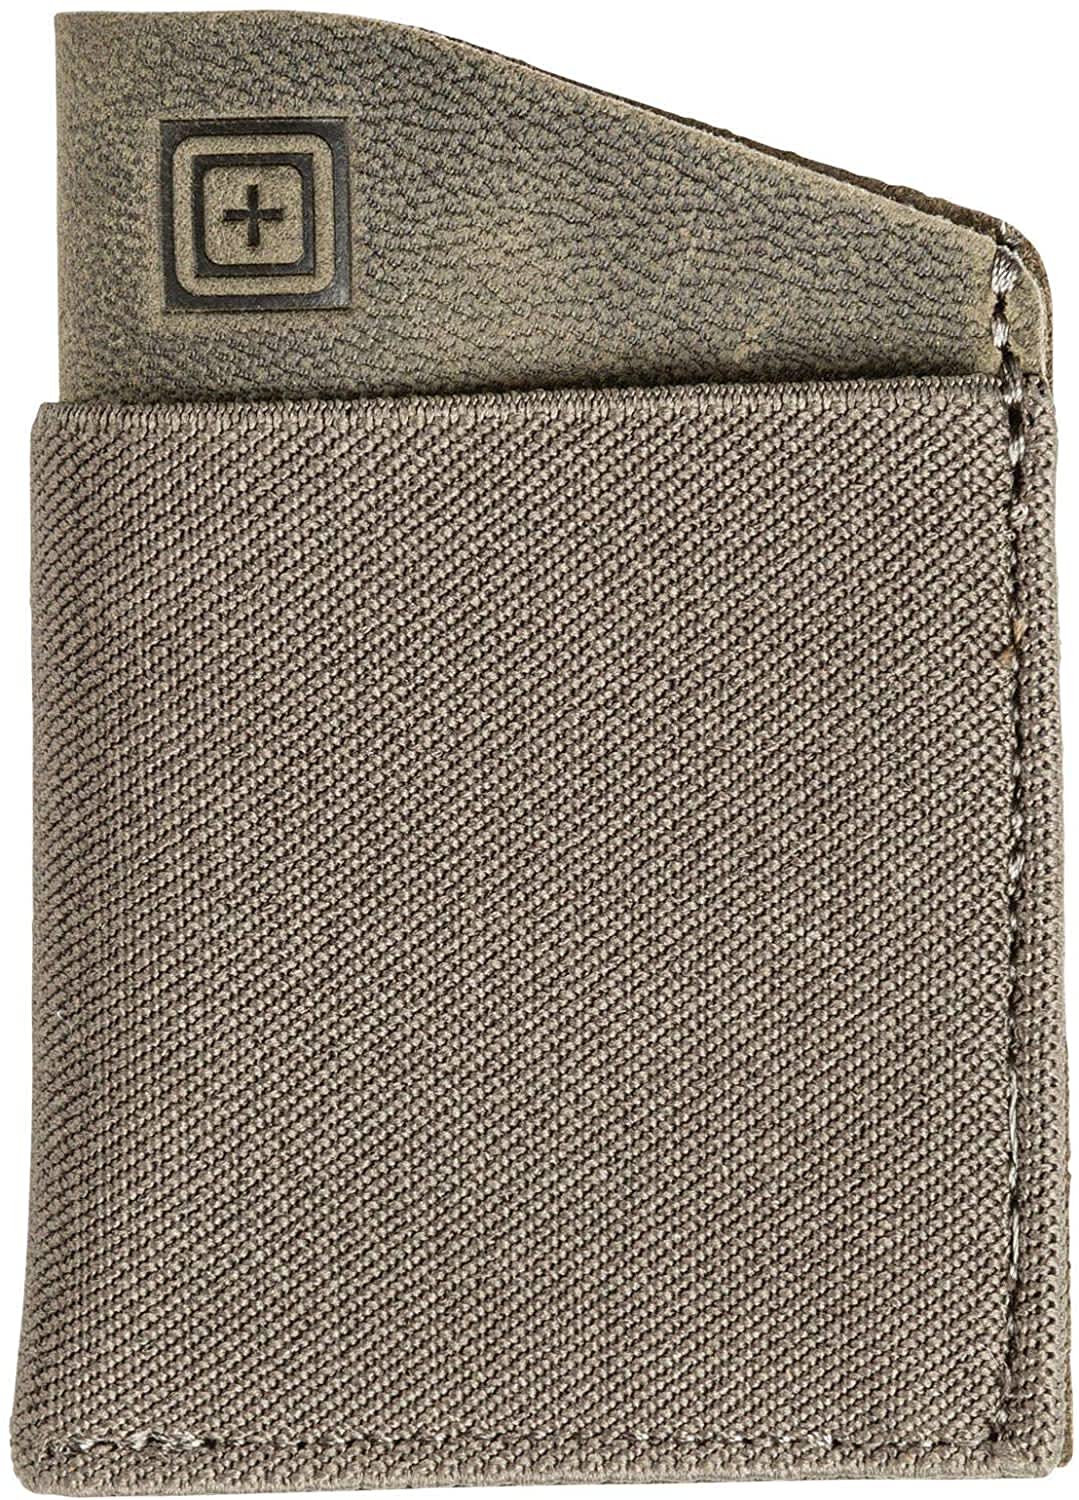 5.11 Tactical Excursion Leather Card Wallet